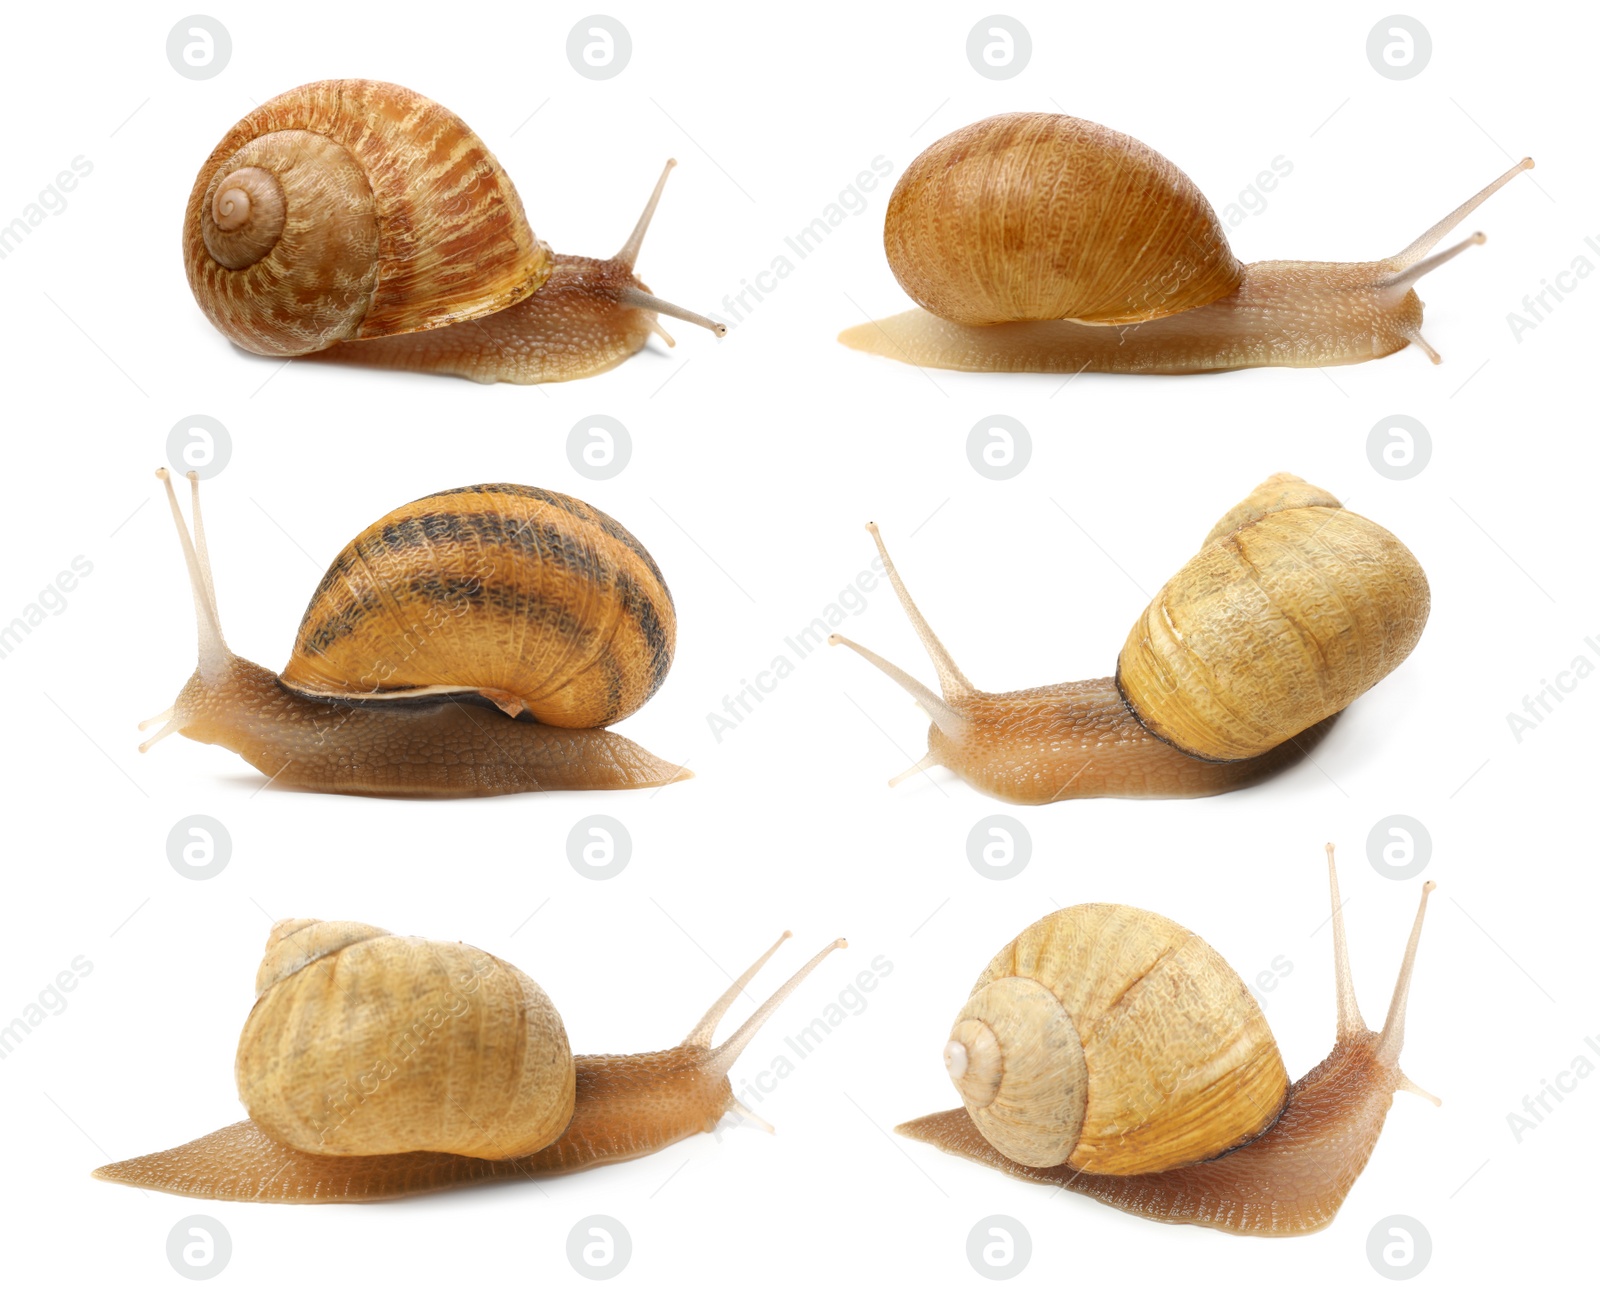 Image of Collection of common garden snails on white background